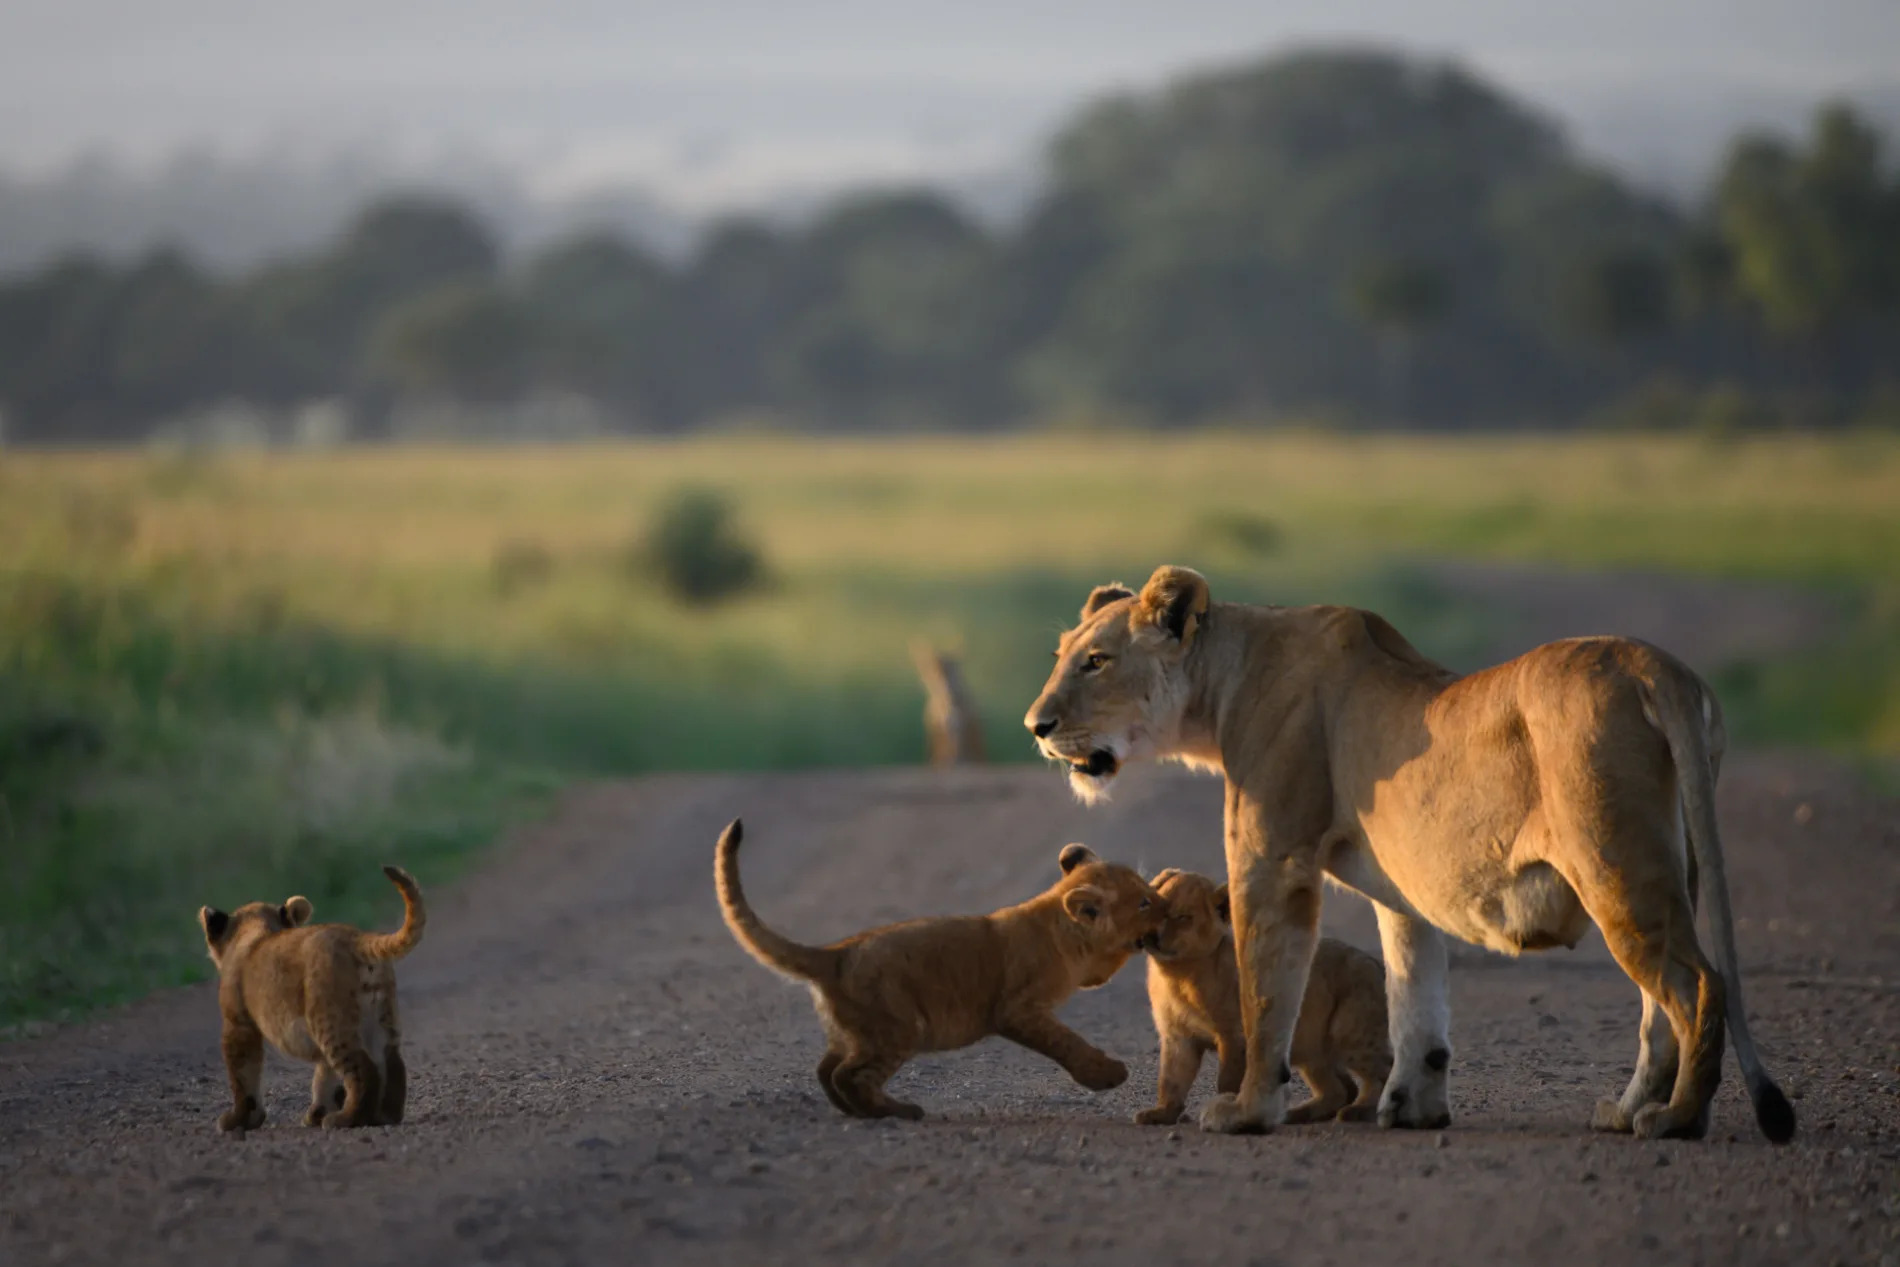 Lion and Cubs